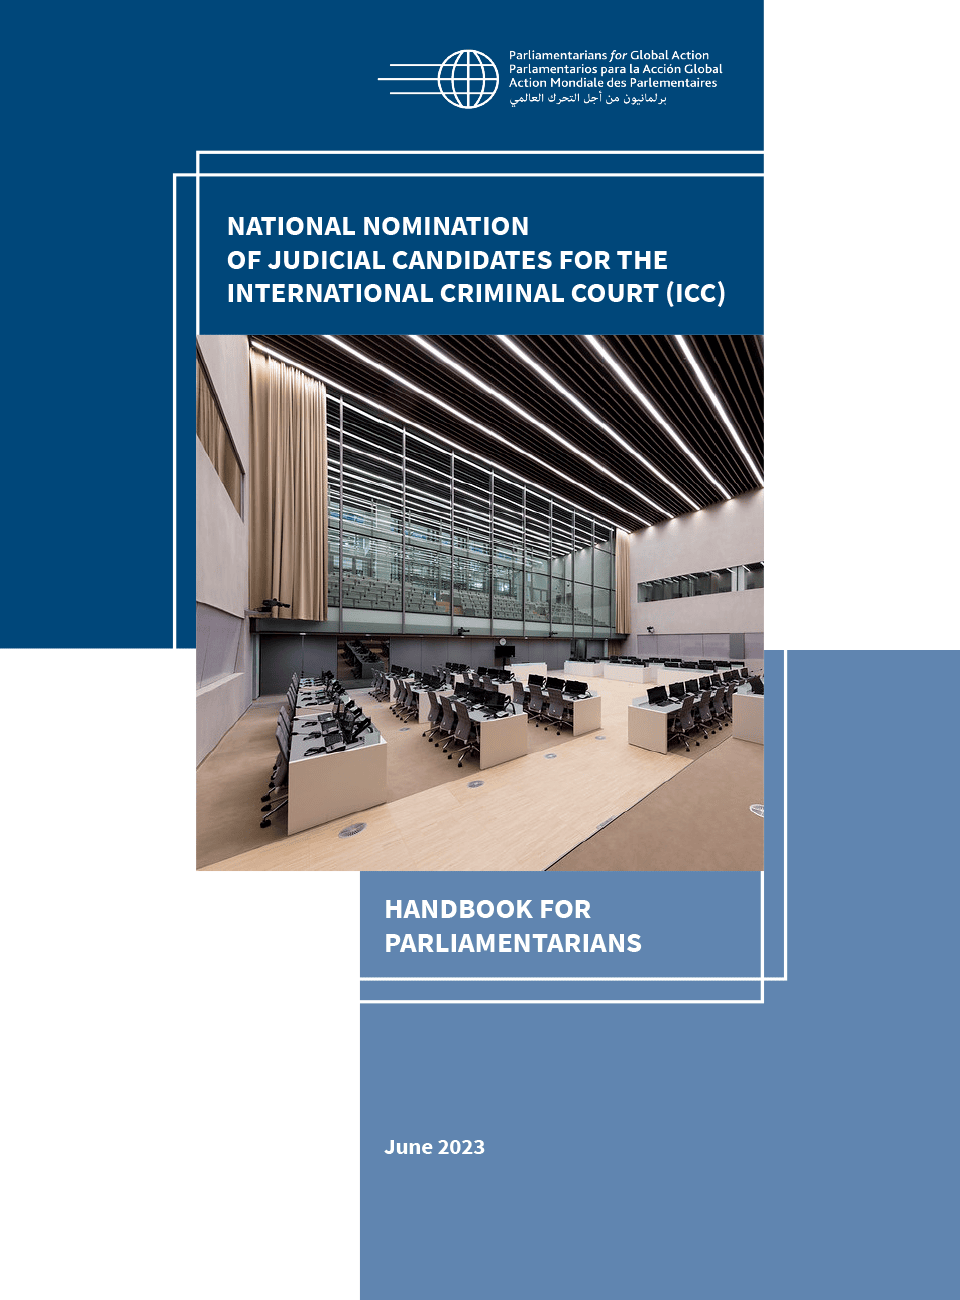 Handbook for Parliamentarians: National Nomination of Judicial Candidates for the International Criminal Court (ICC)